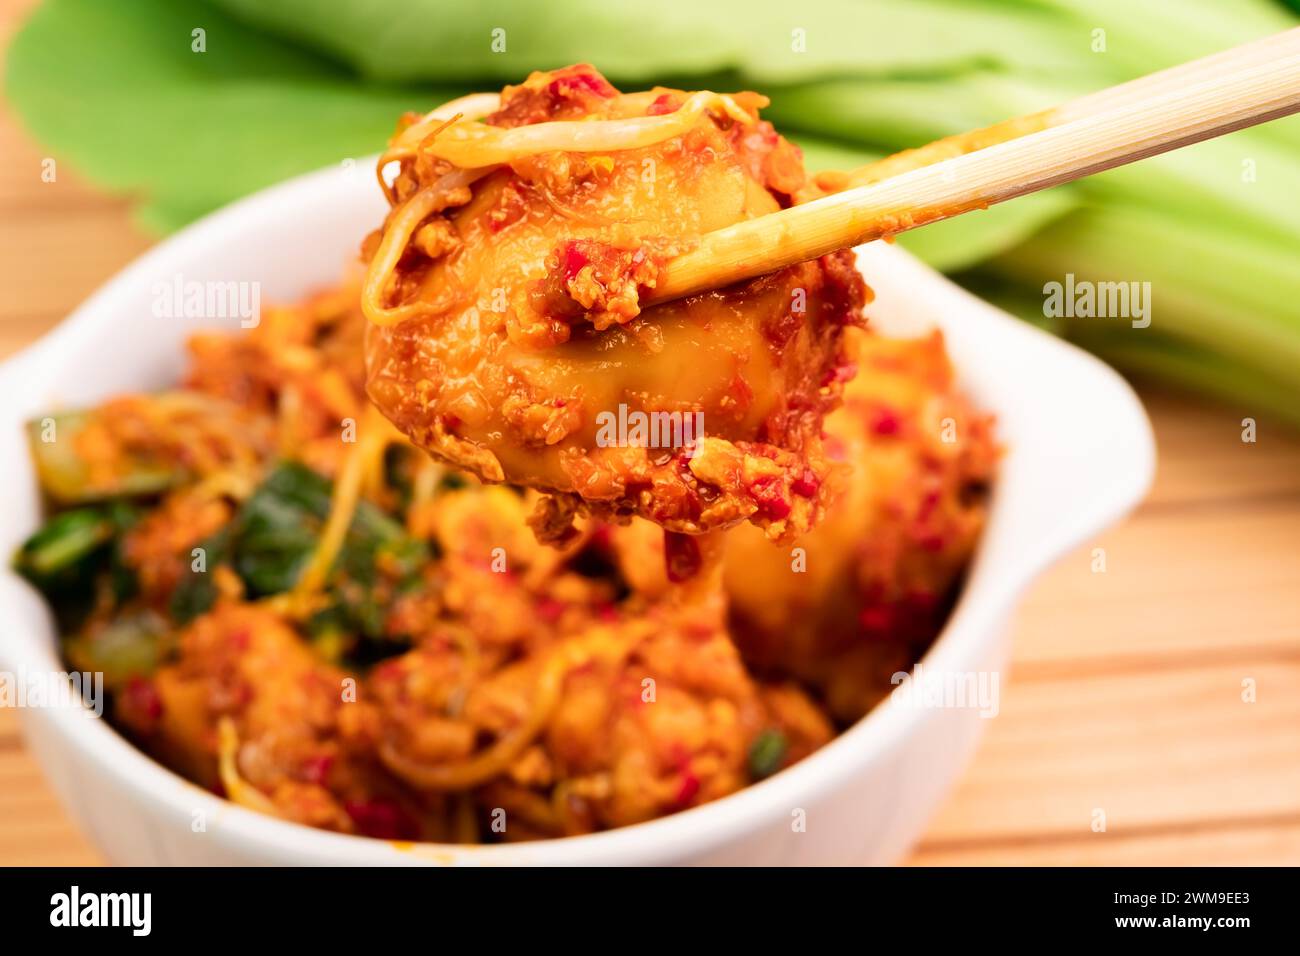 Fried dumplings in a white bowl. Made from wet dumplings that are sauteed with mustard greens, bean sprouts and spicy seasonings Stock Photo